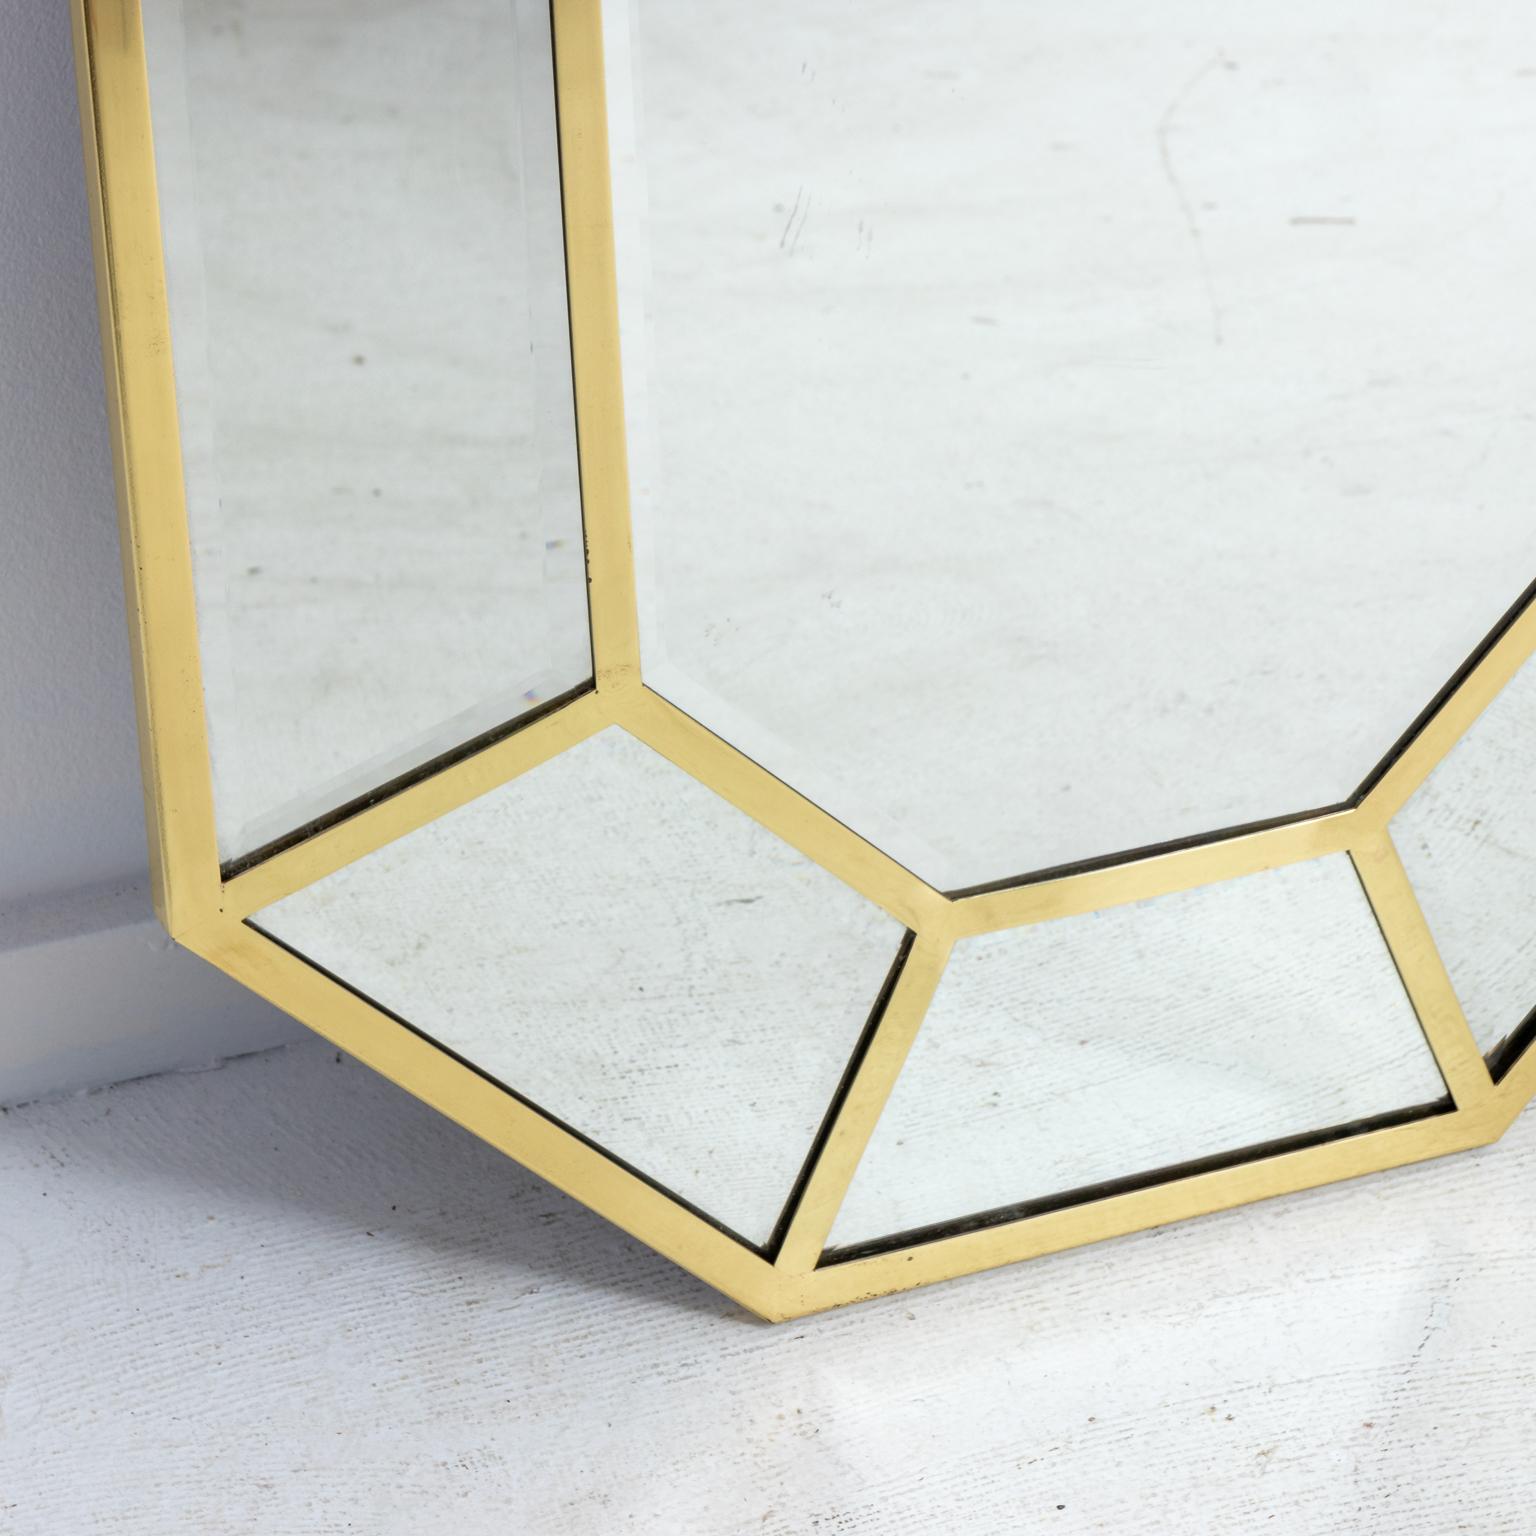 Vintage octagonal faceted brass wall mirror by LaBarge, circa 1970s. Each mirror section features a beveled finish. Made in the United States. Please note of wear consistent with age including patina to metal and minor losses.